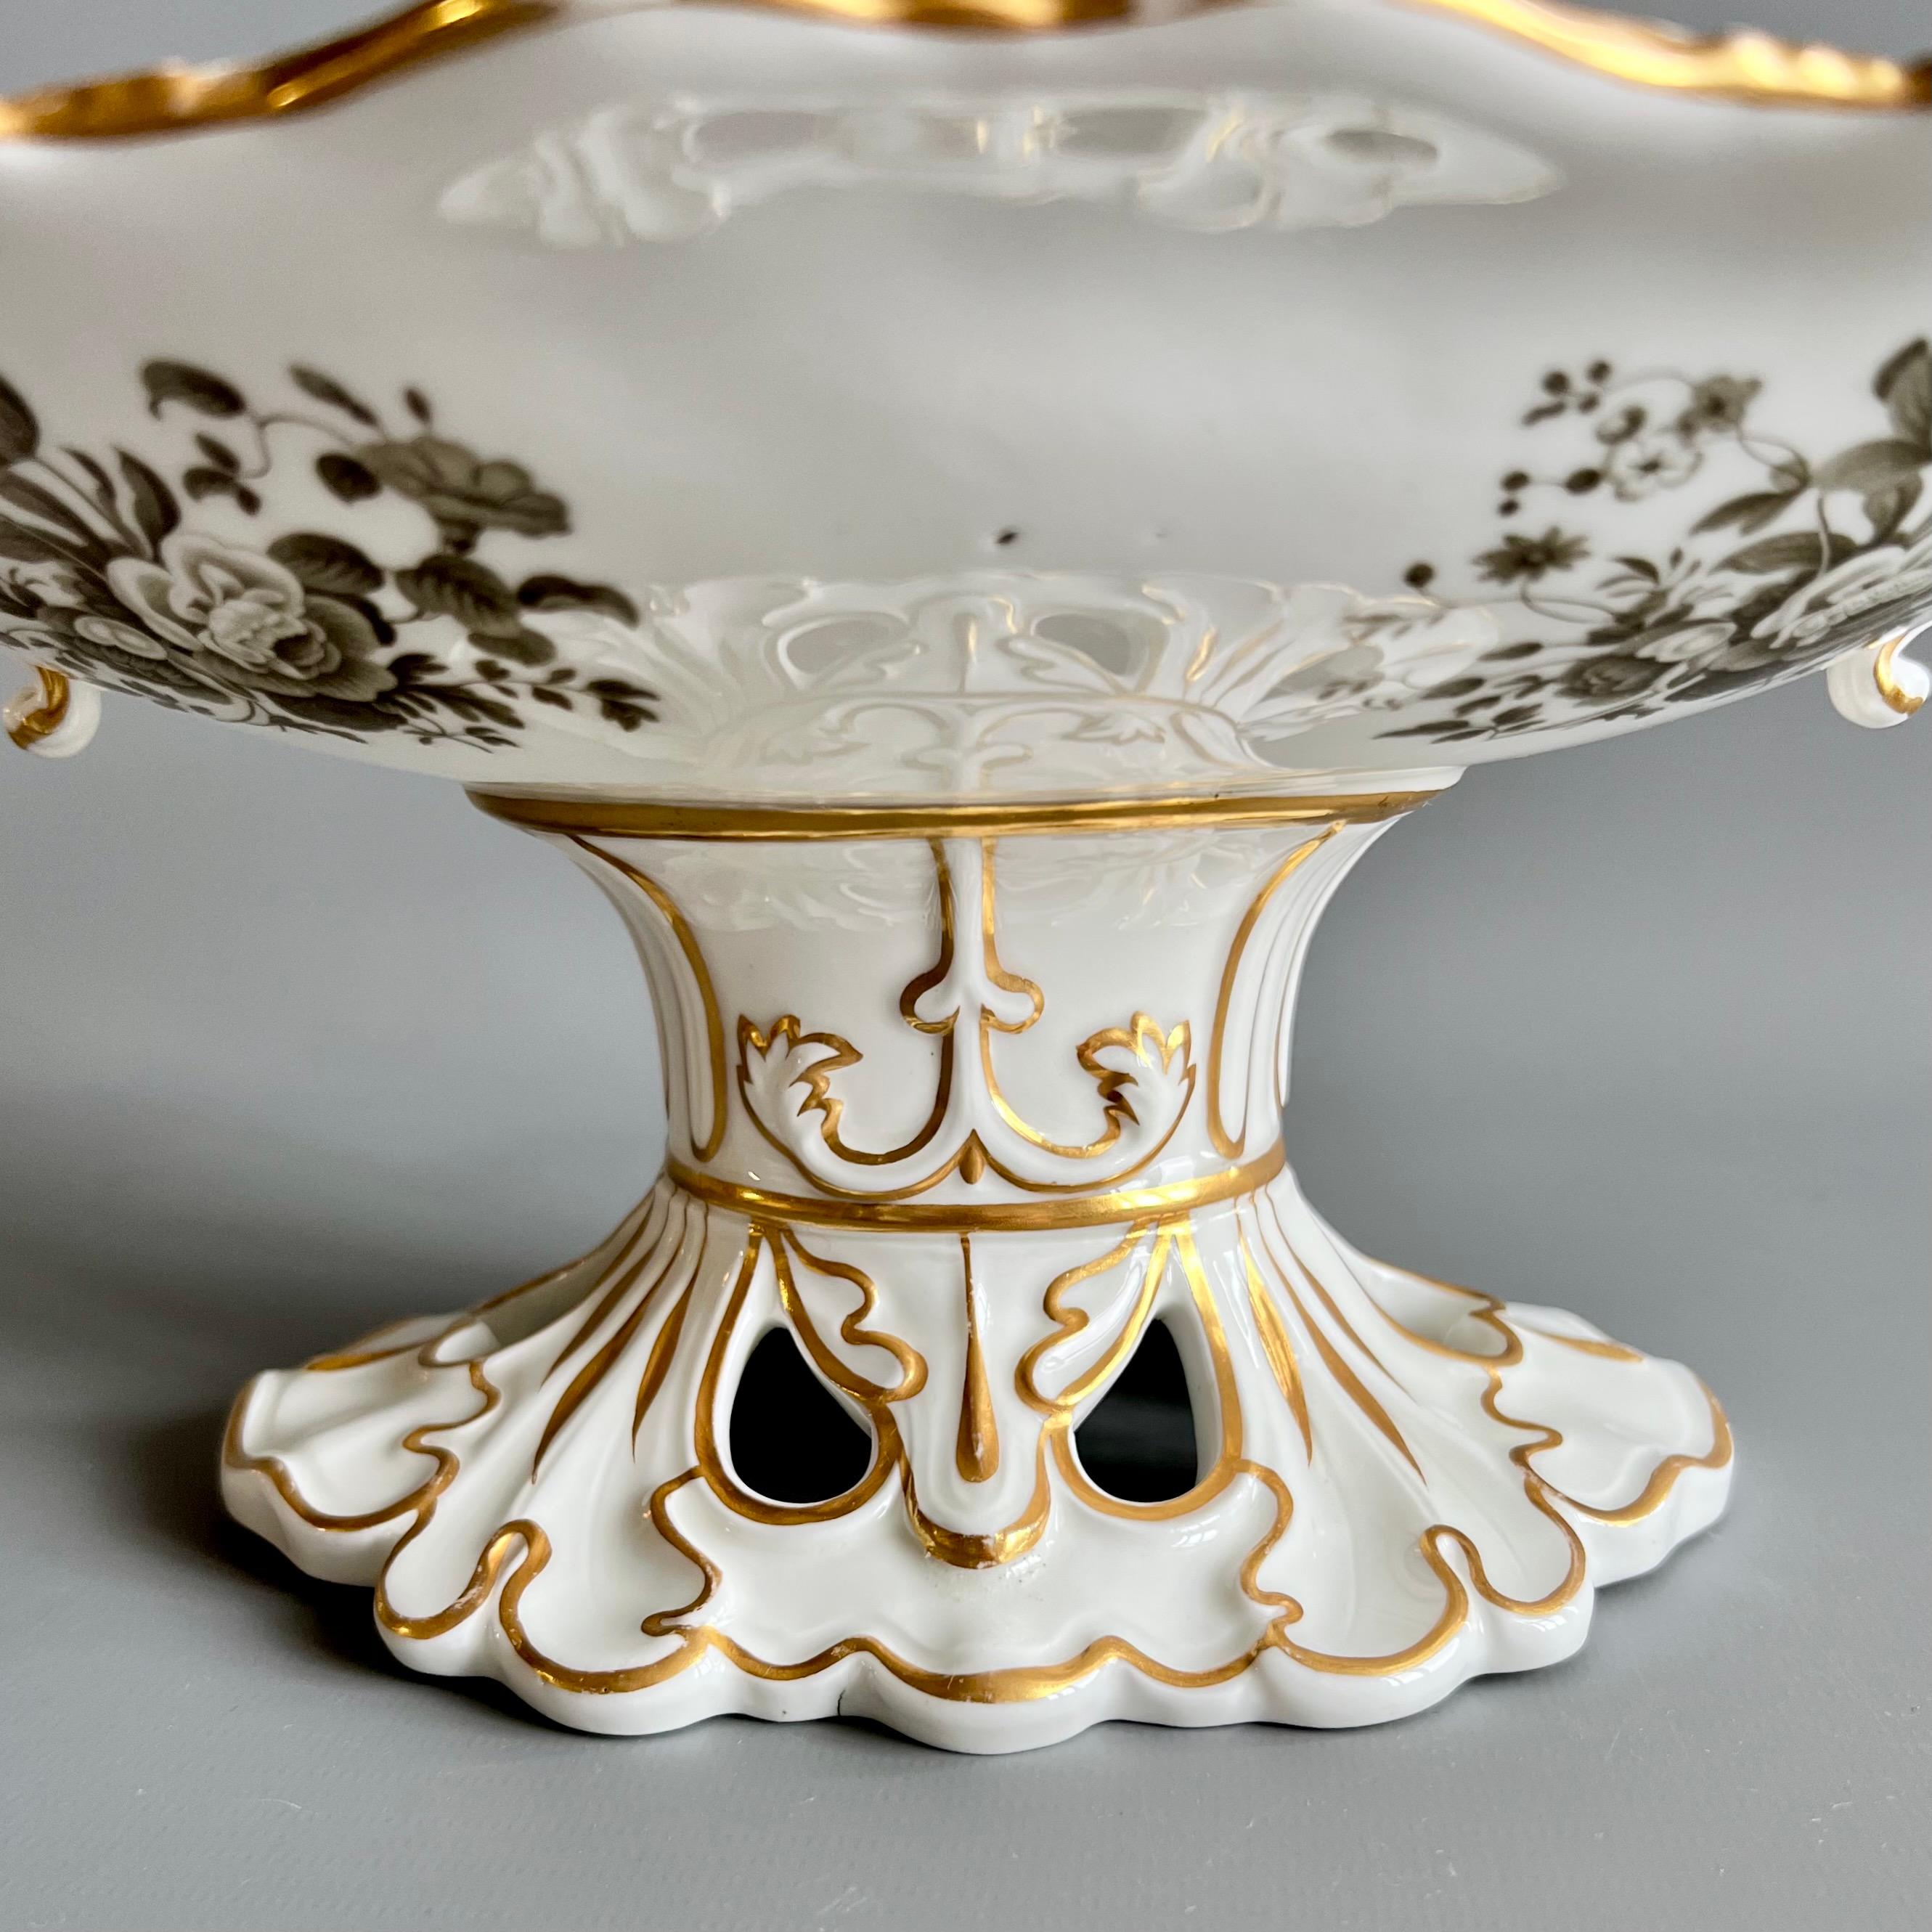 Minton Dessert Service, Inverted Shell White with Monochrome Flowers, ca 1830 For Sale 2